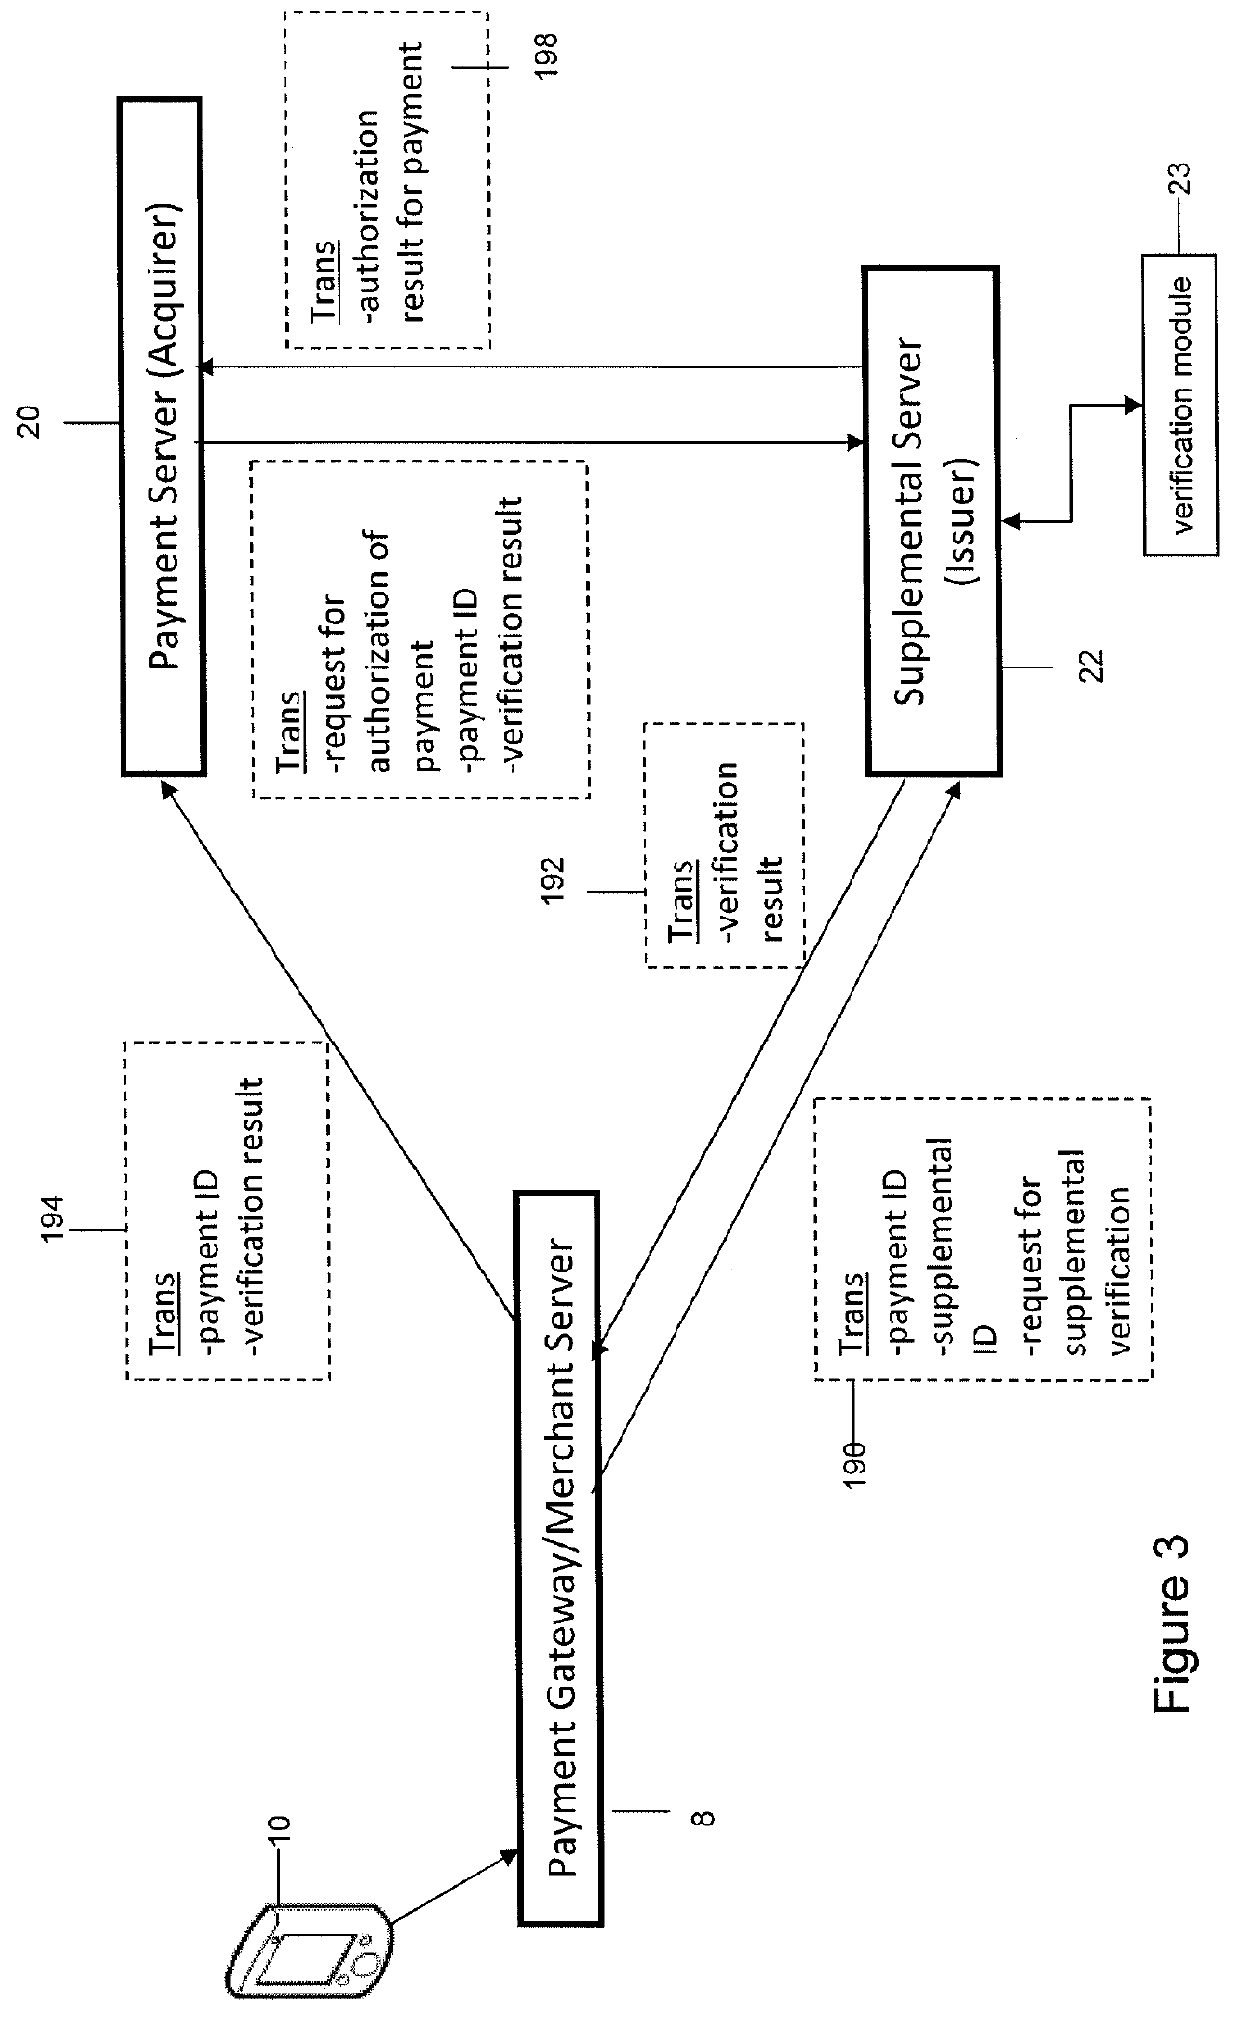 System and method for initiating transactions on a mobile device